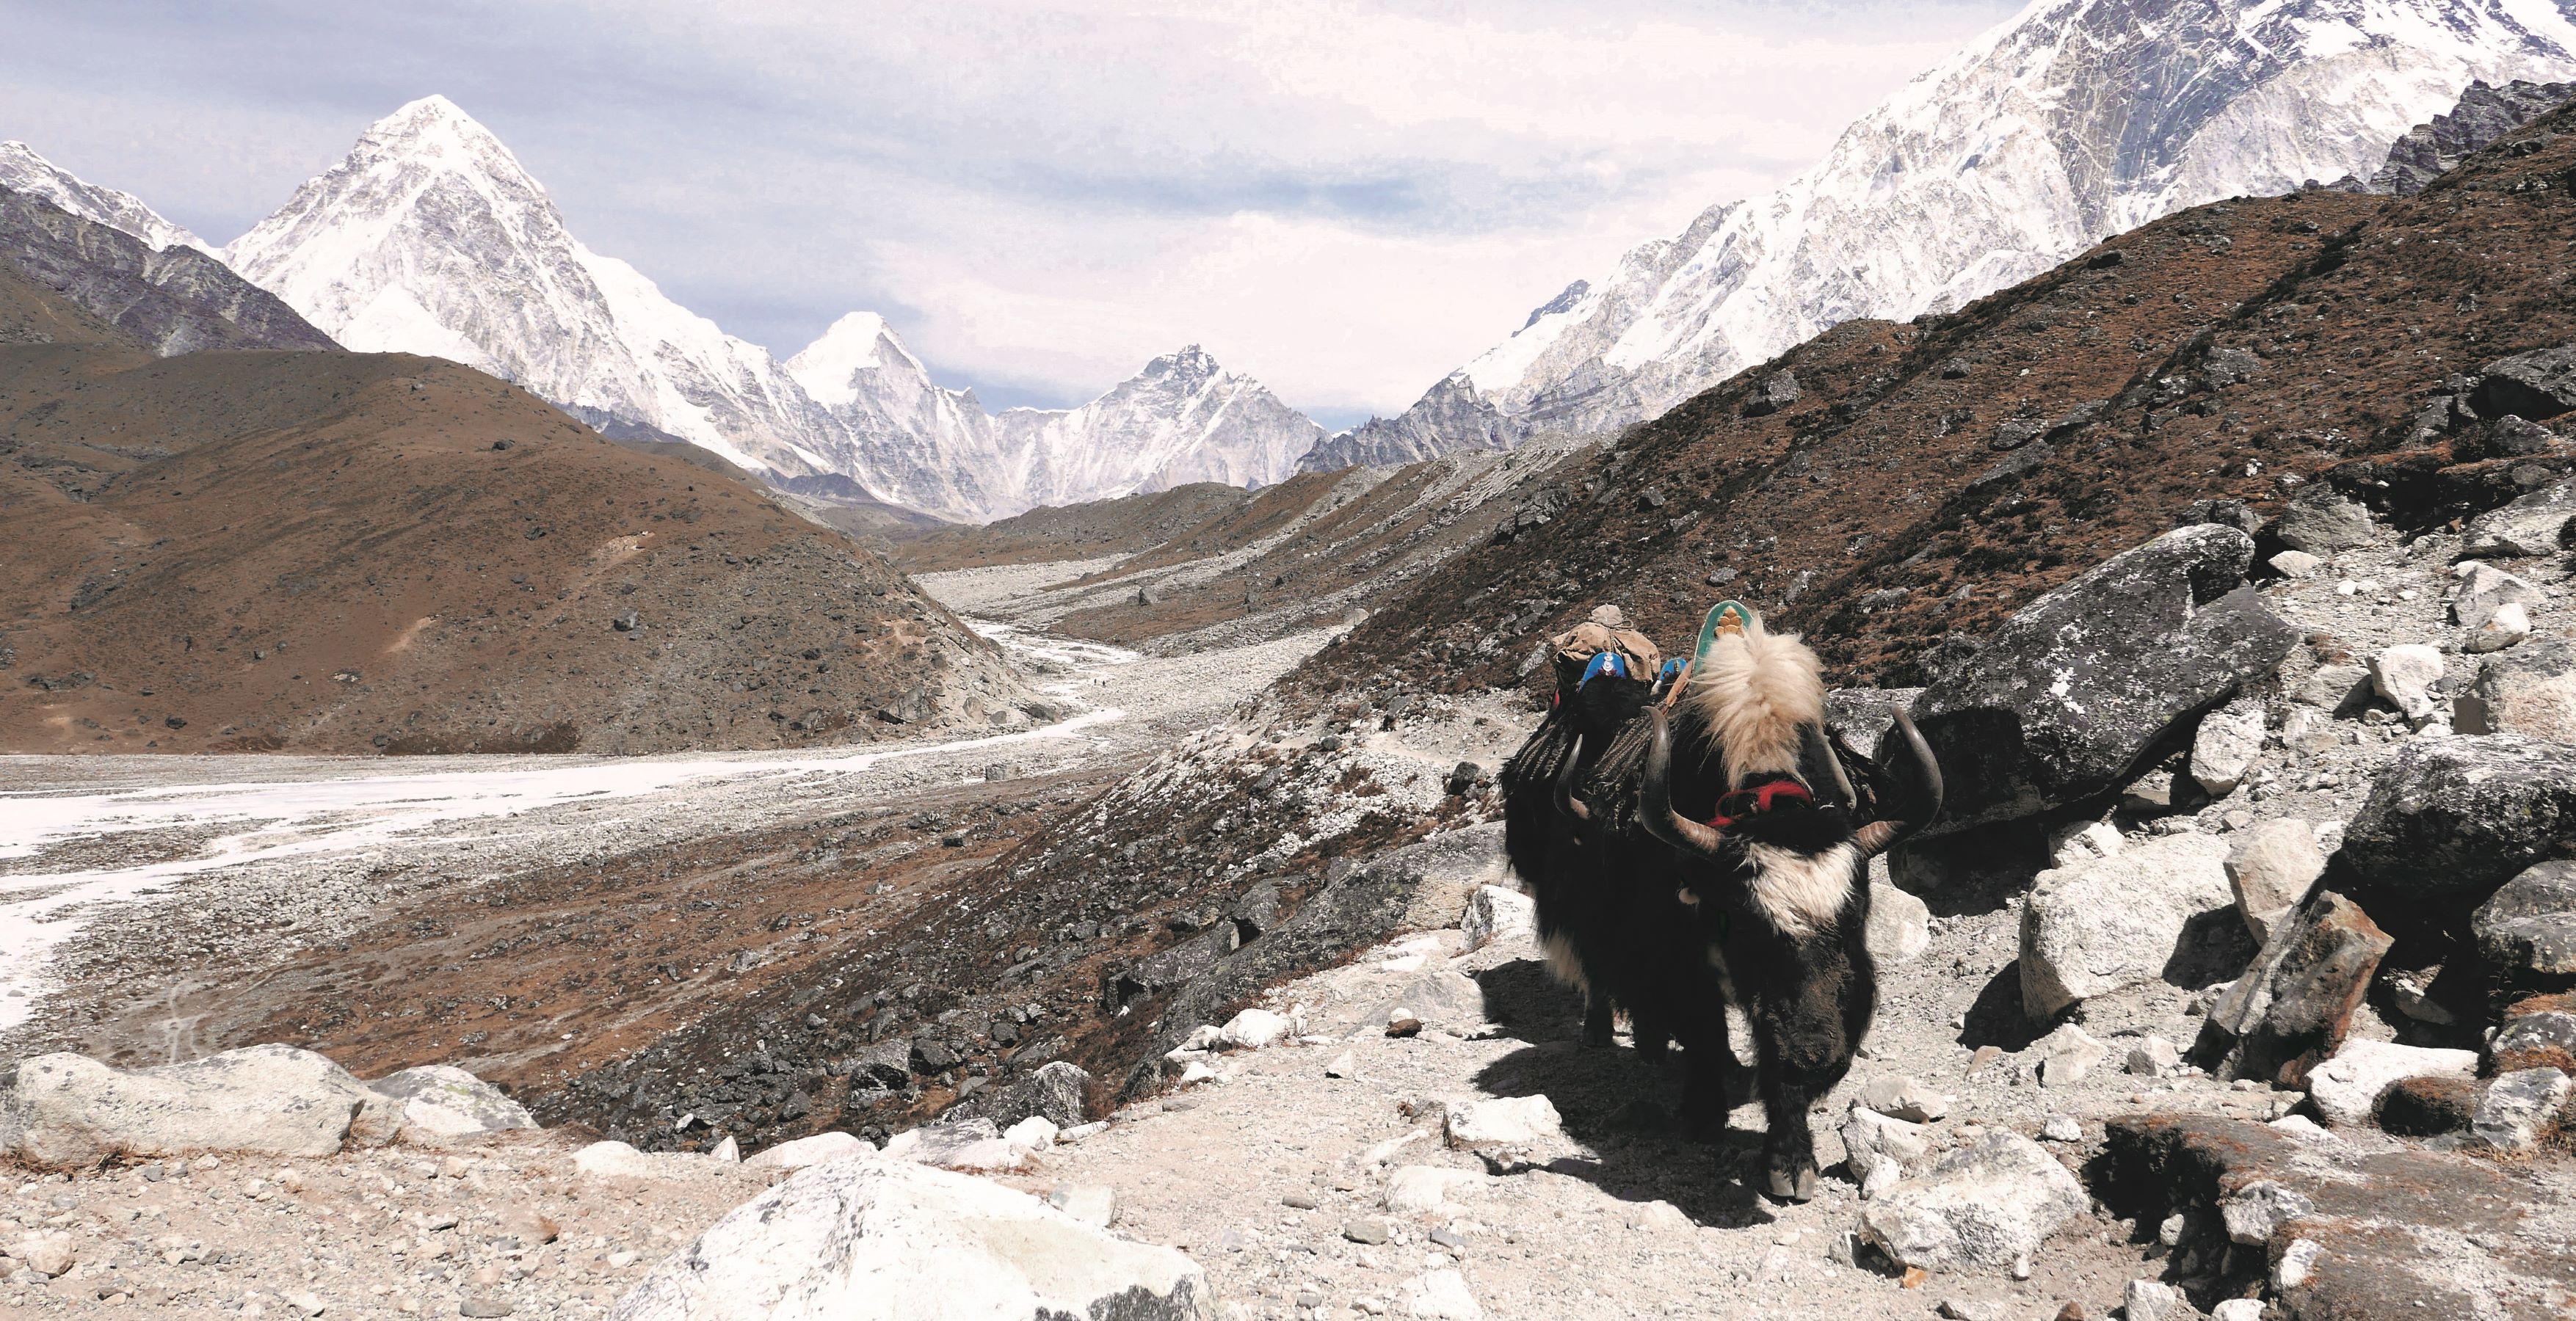 Yaks carry loads in the upper Khumbu Valley